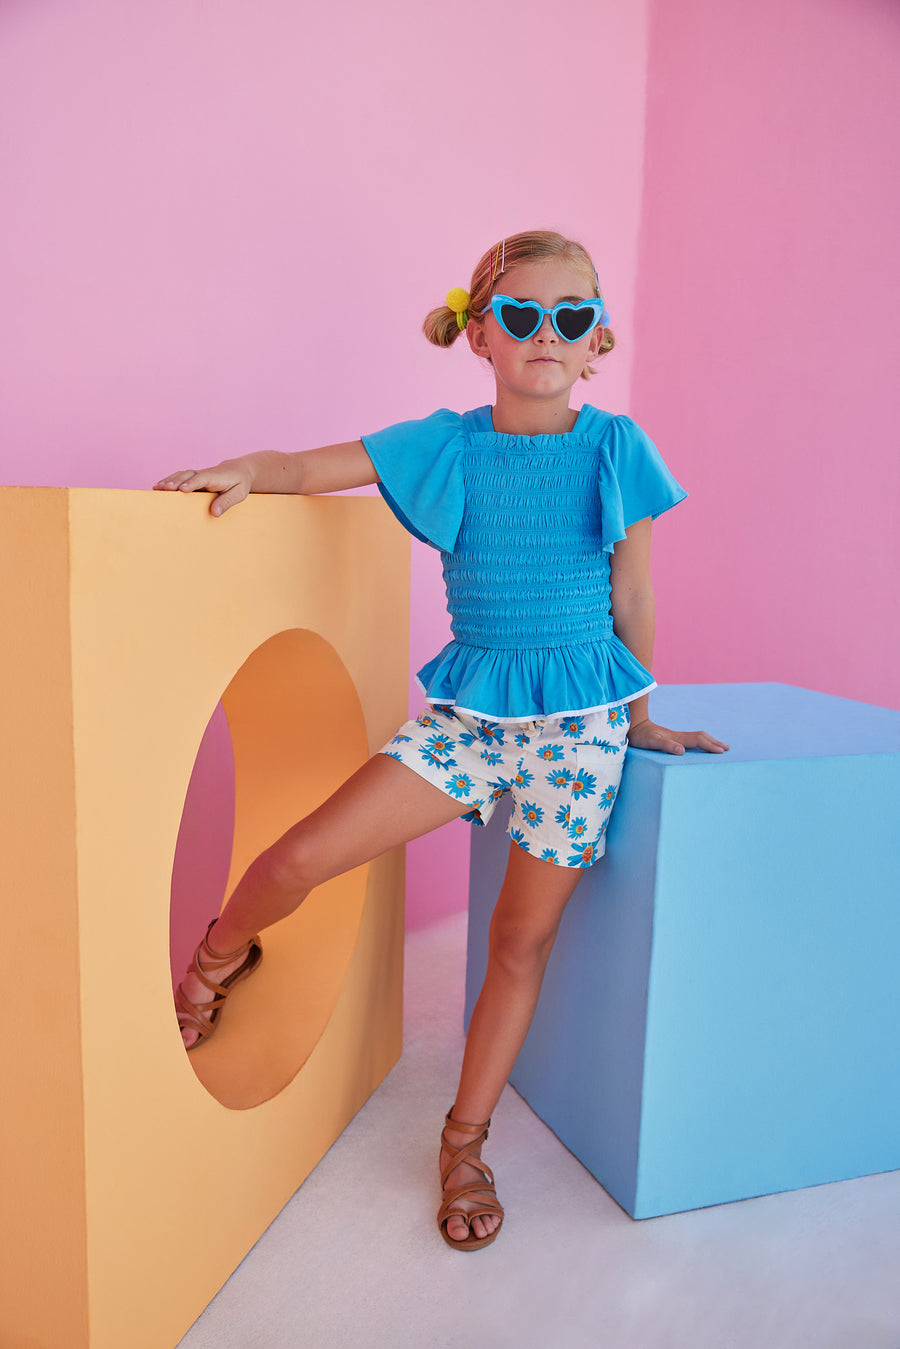 BISBY girl wearing our new Patch Pocket Shorts in our Fenwick Blue floral pattern. These shorts have pockets in the front and fixed ties with an elastic waistband. They pair perfectly back with our India Top in Blue or even our Michaela top in Fenwick Blue for a completed look.